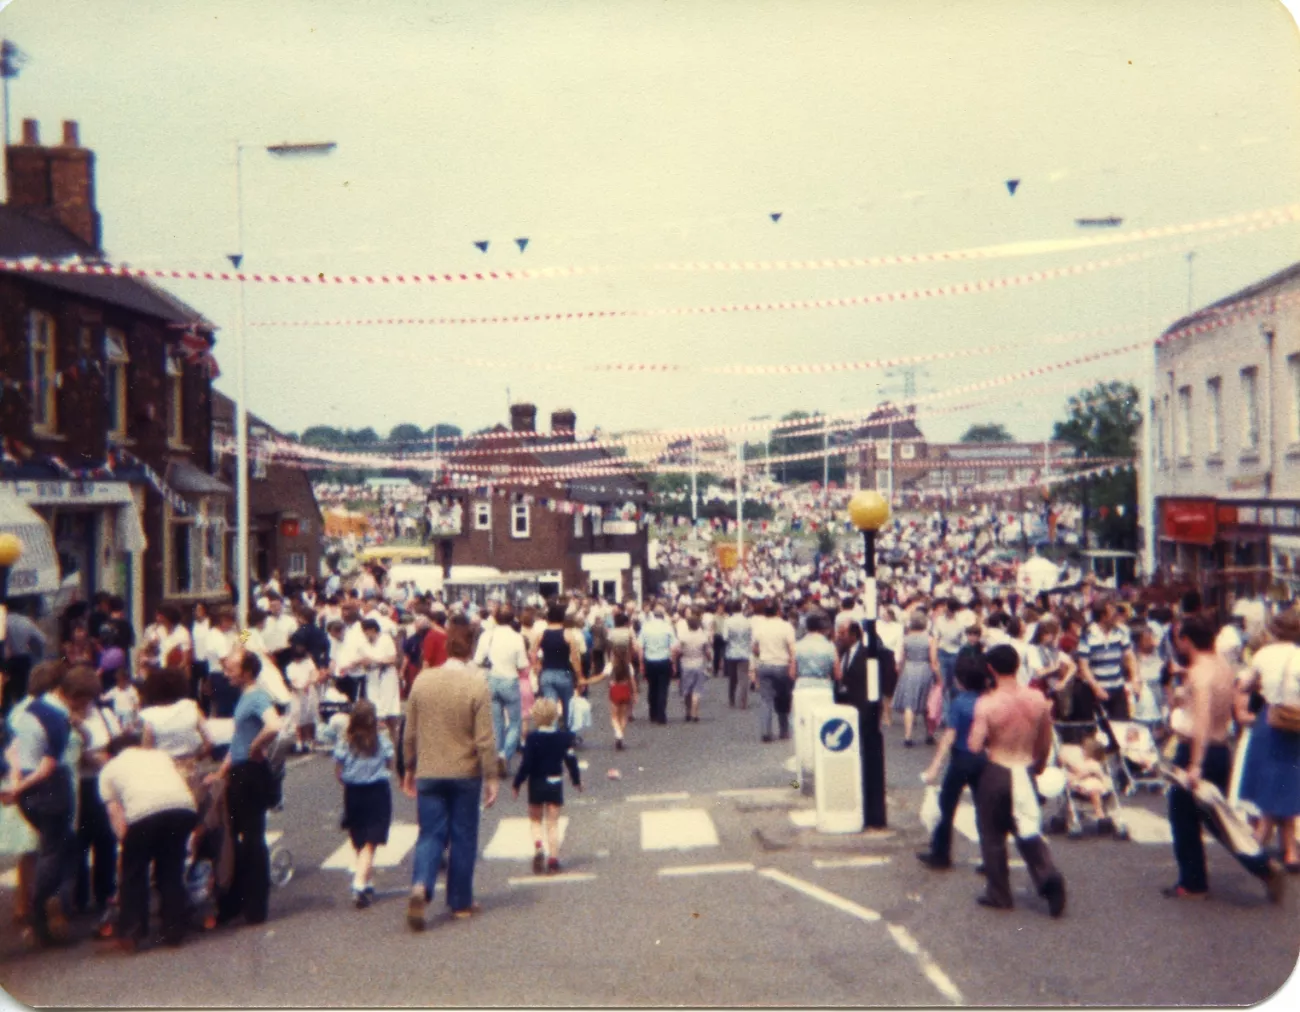 A dated image from 1982, with a Corby town square full of people and bunting overhead